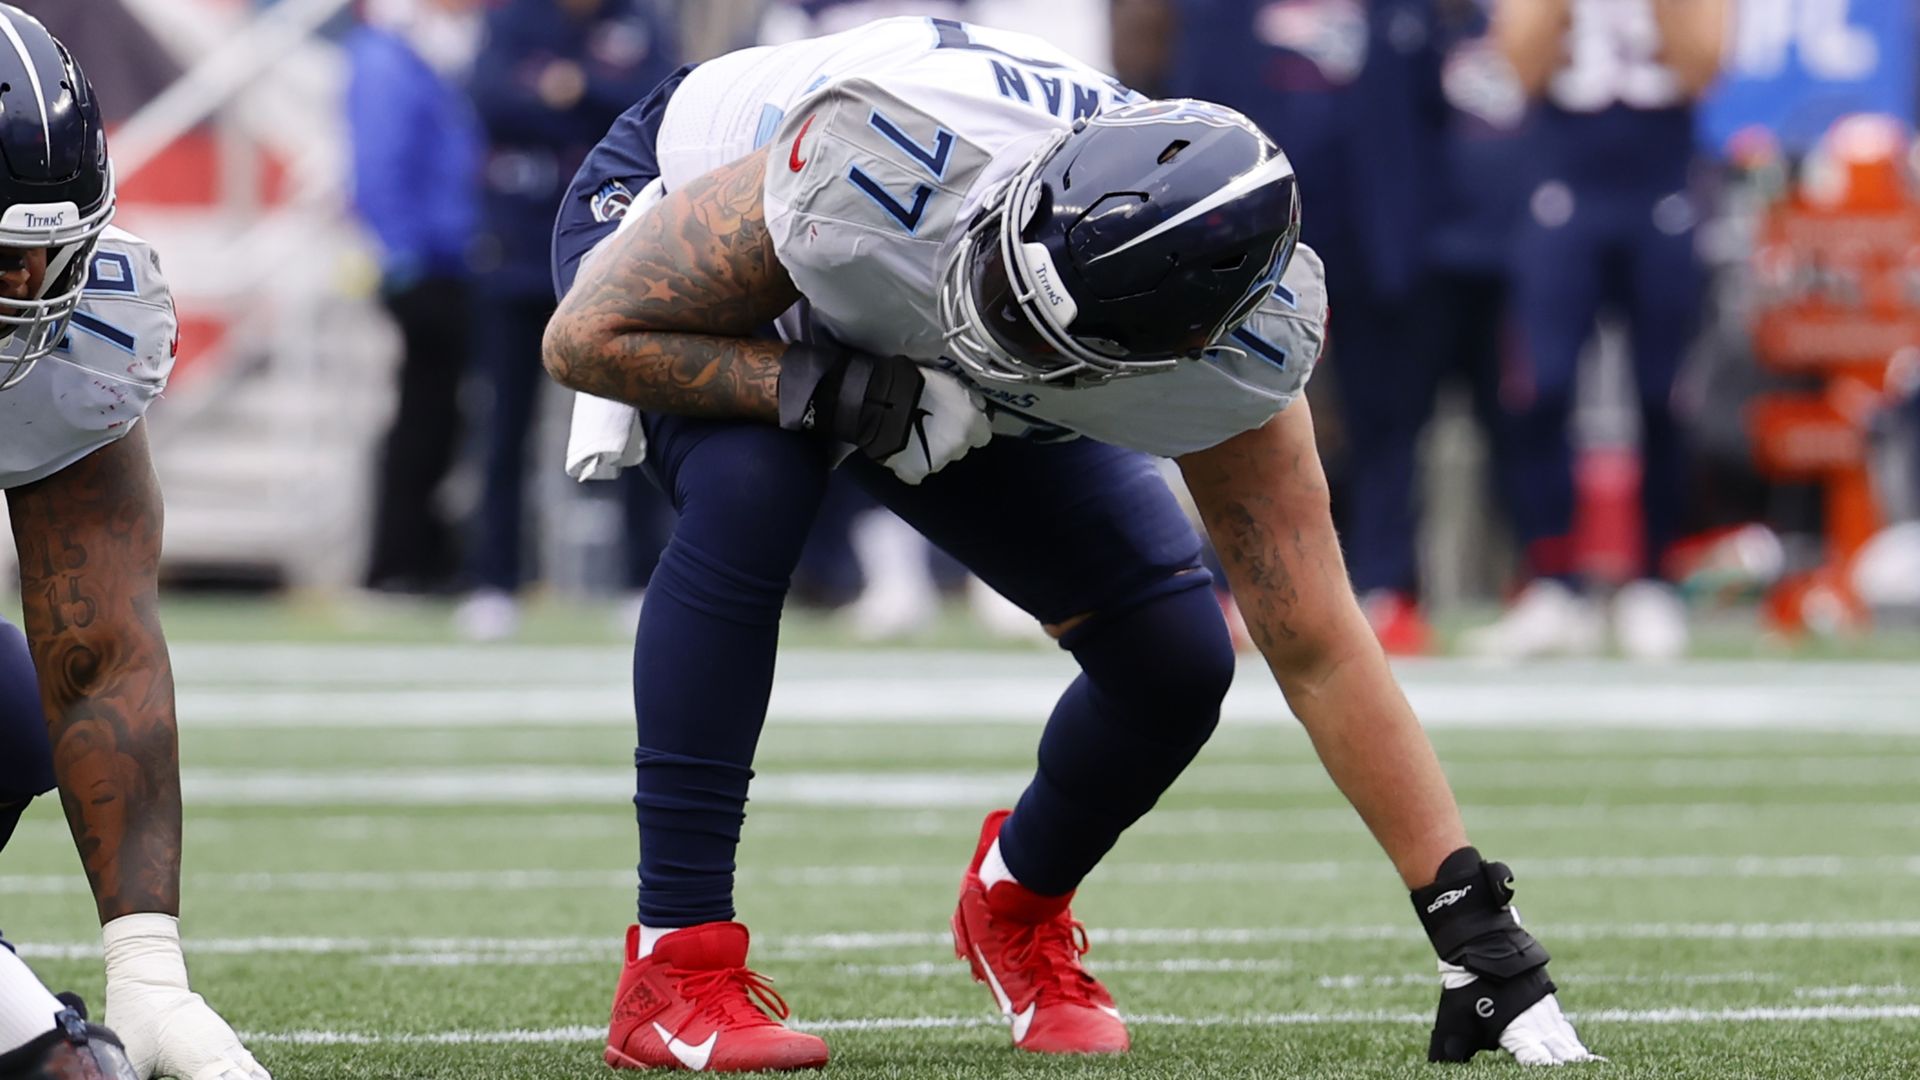 Tennessee Titans offensive tackle Taylor Lewan crouches on a football field.